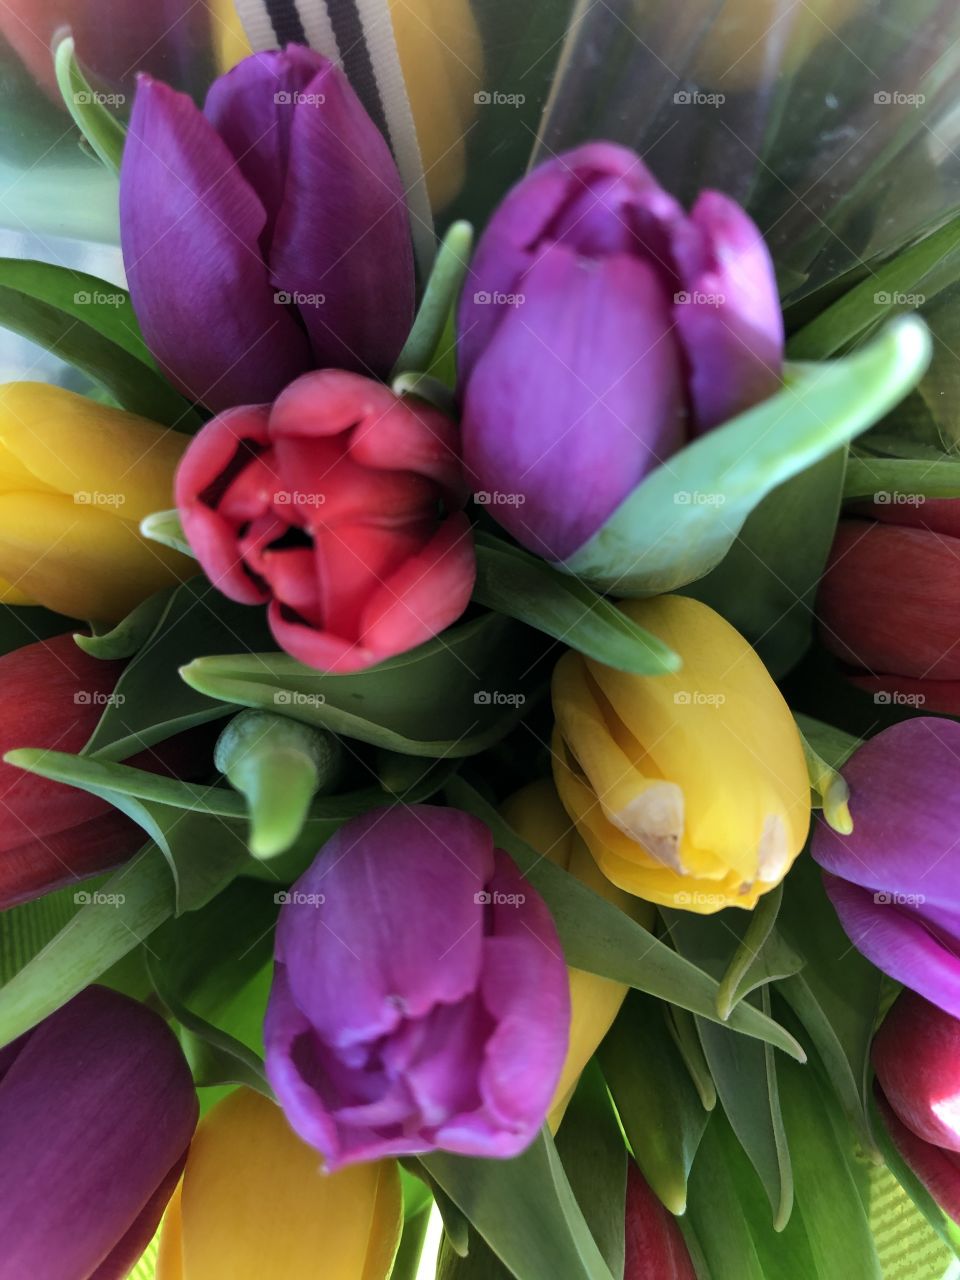 Some very lush tulips with beautifully splendid assorted radiant colors for us to enjoy.